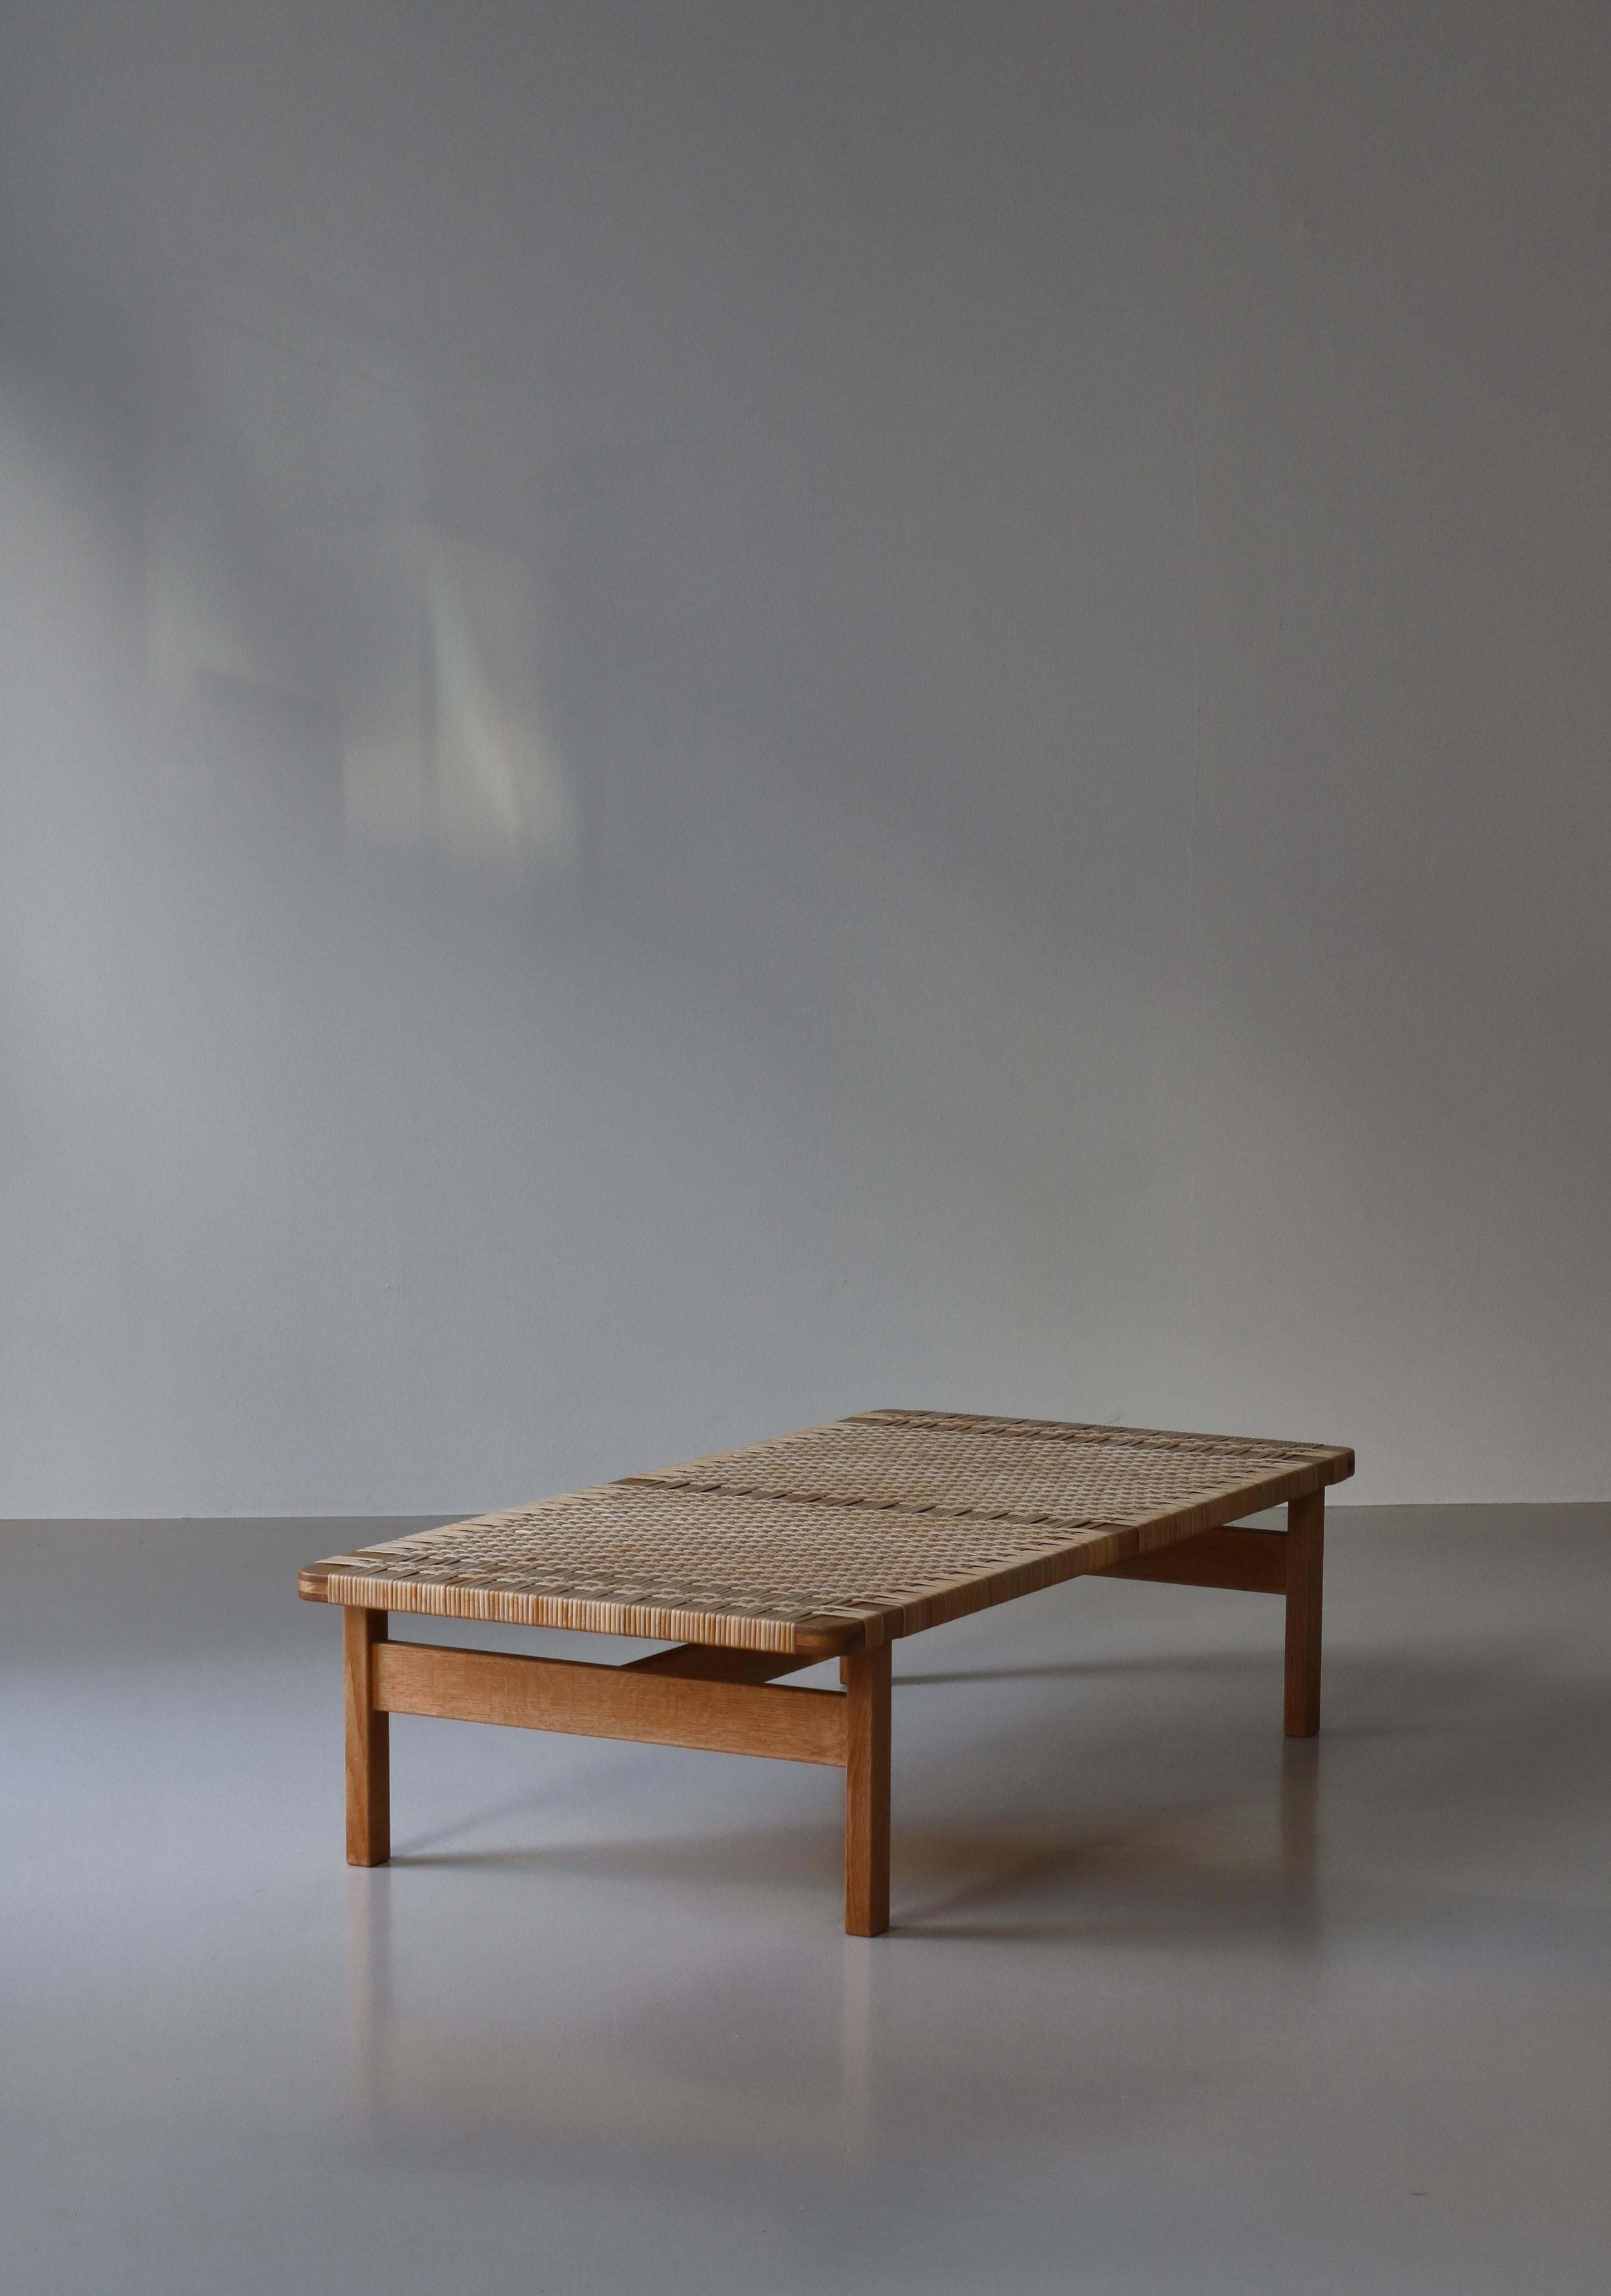 Borge Mogensen Large Side Table or Bench in Oak and Rattan Cane, 1960s, Denmark In Good Condition For Sale In Odense, DK